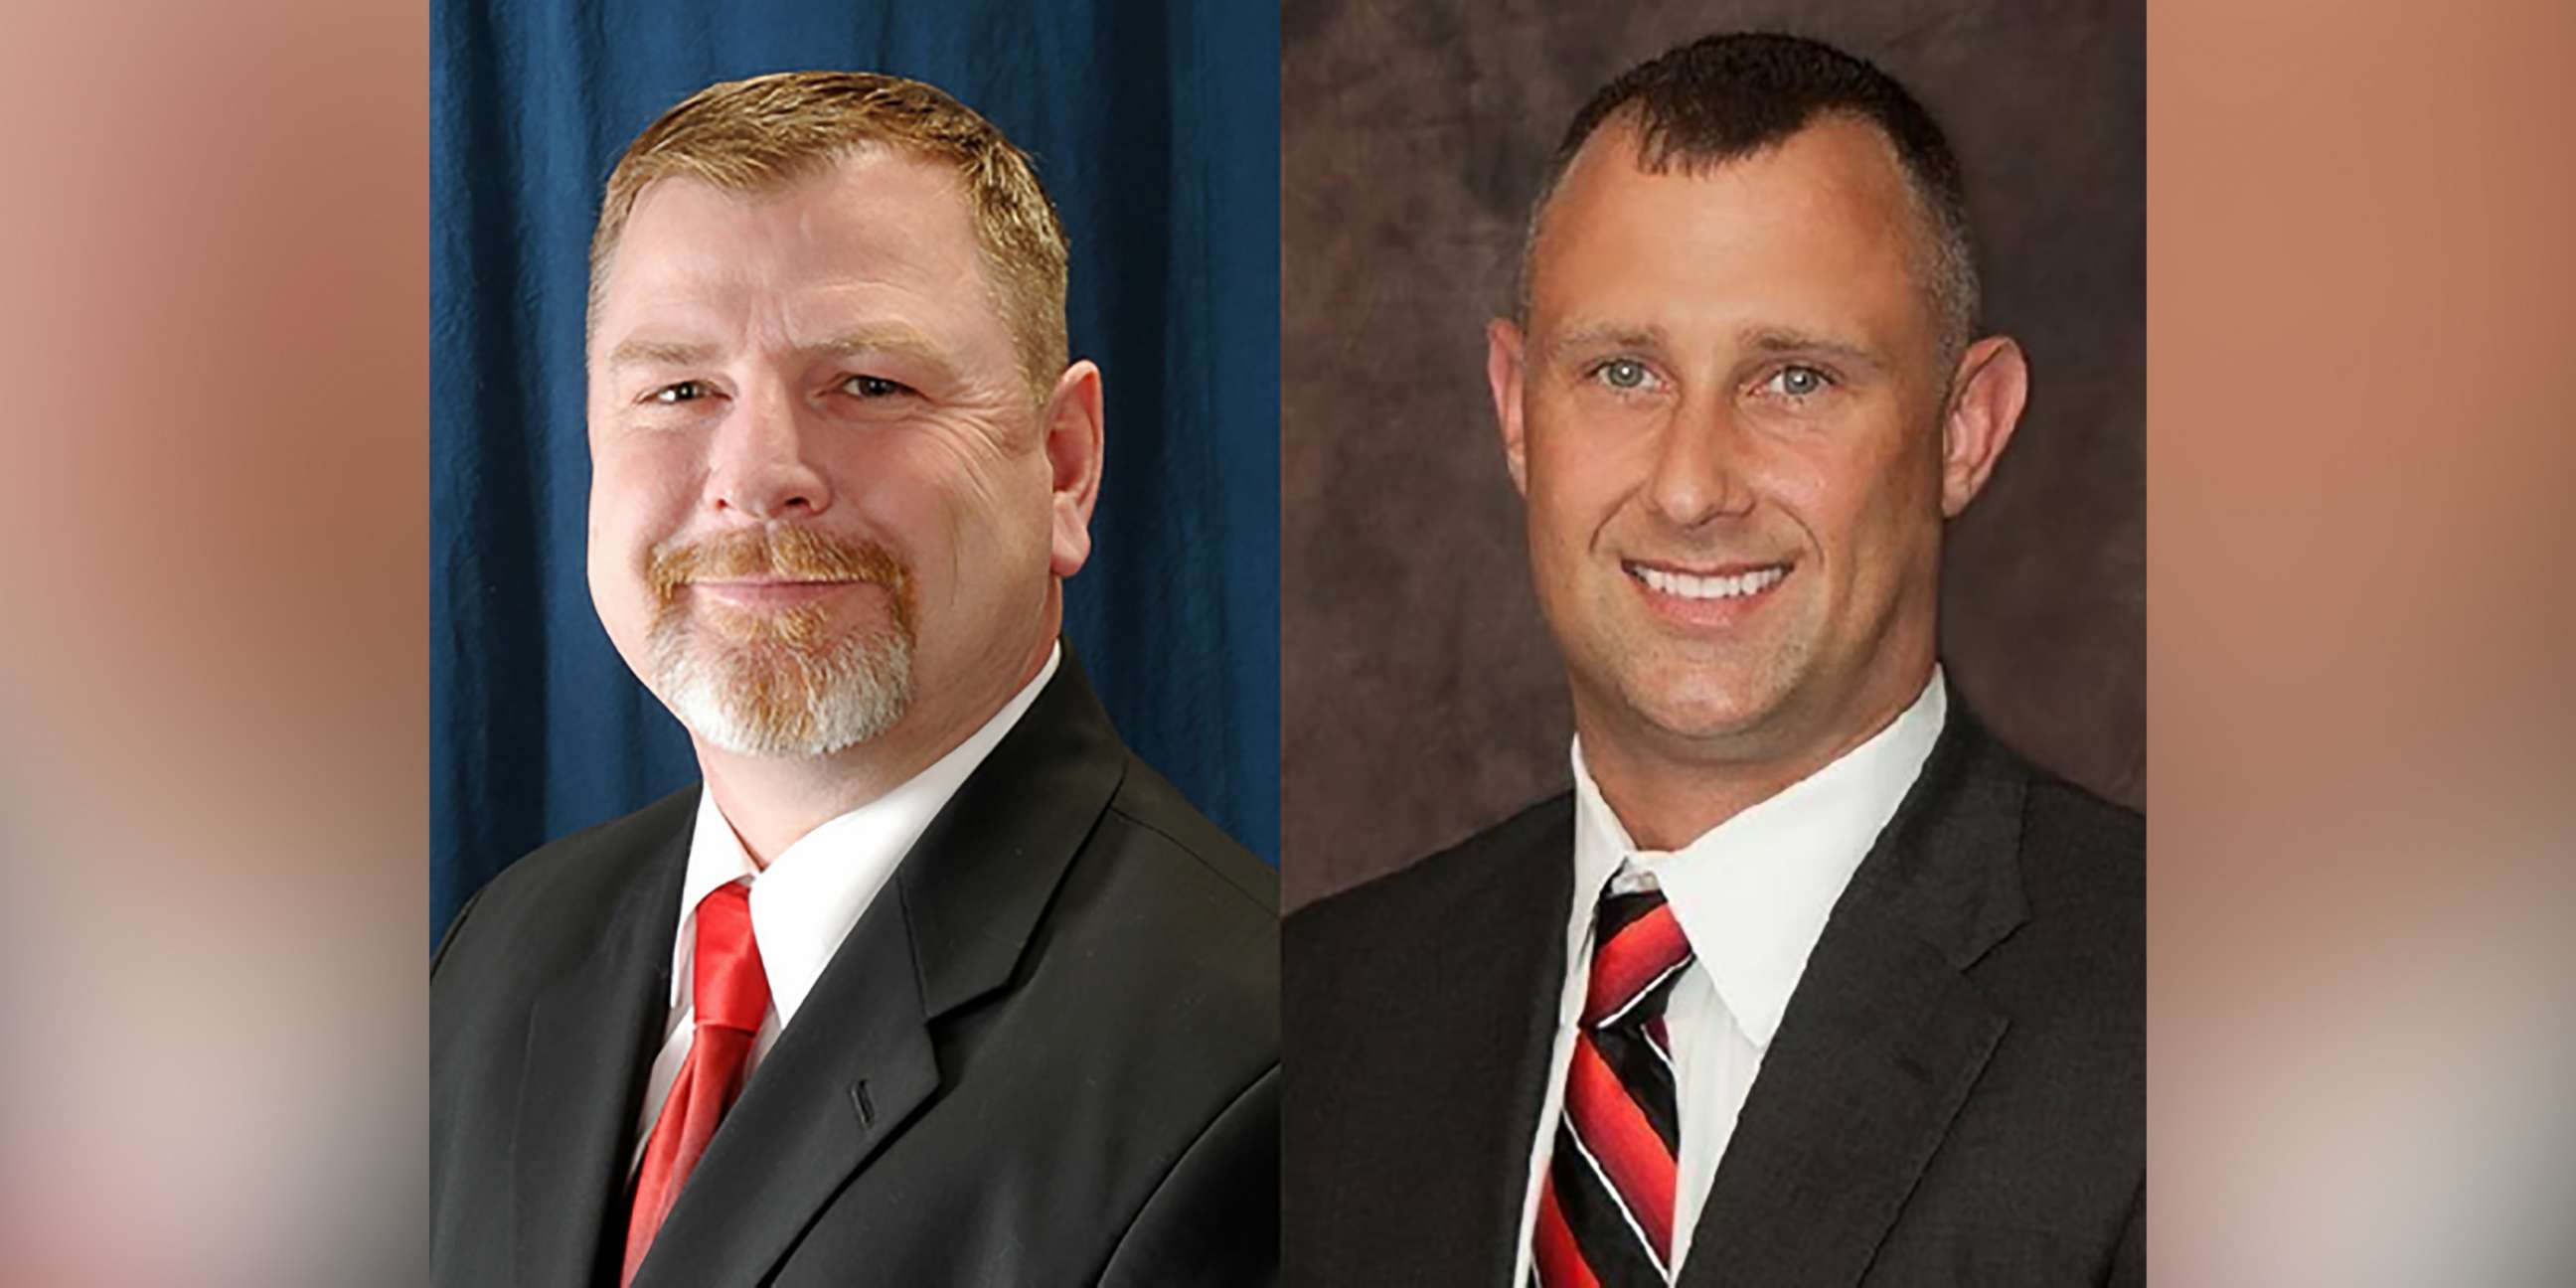 PHOTO: Photos of Judge Andrew Adams and Judge Brad Jacobs, right, from the Office of the Clark County Prosecuting Attorney website.